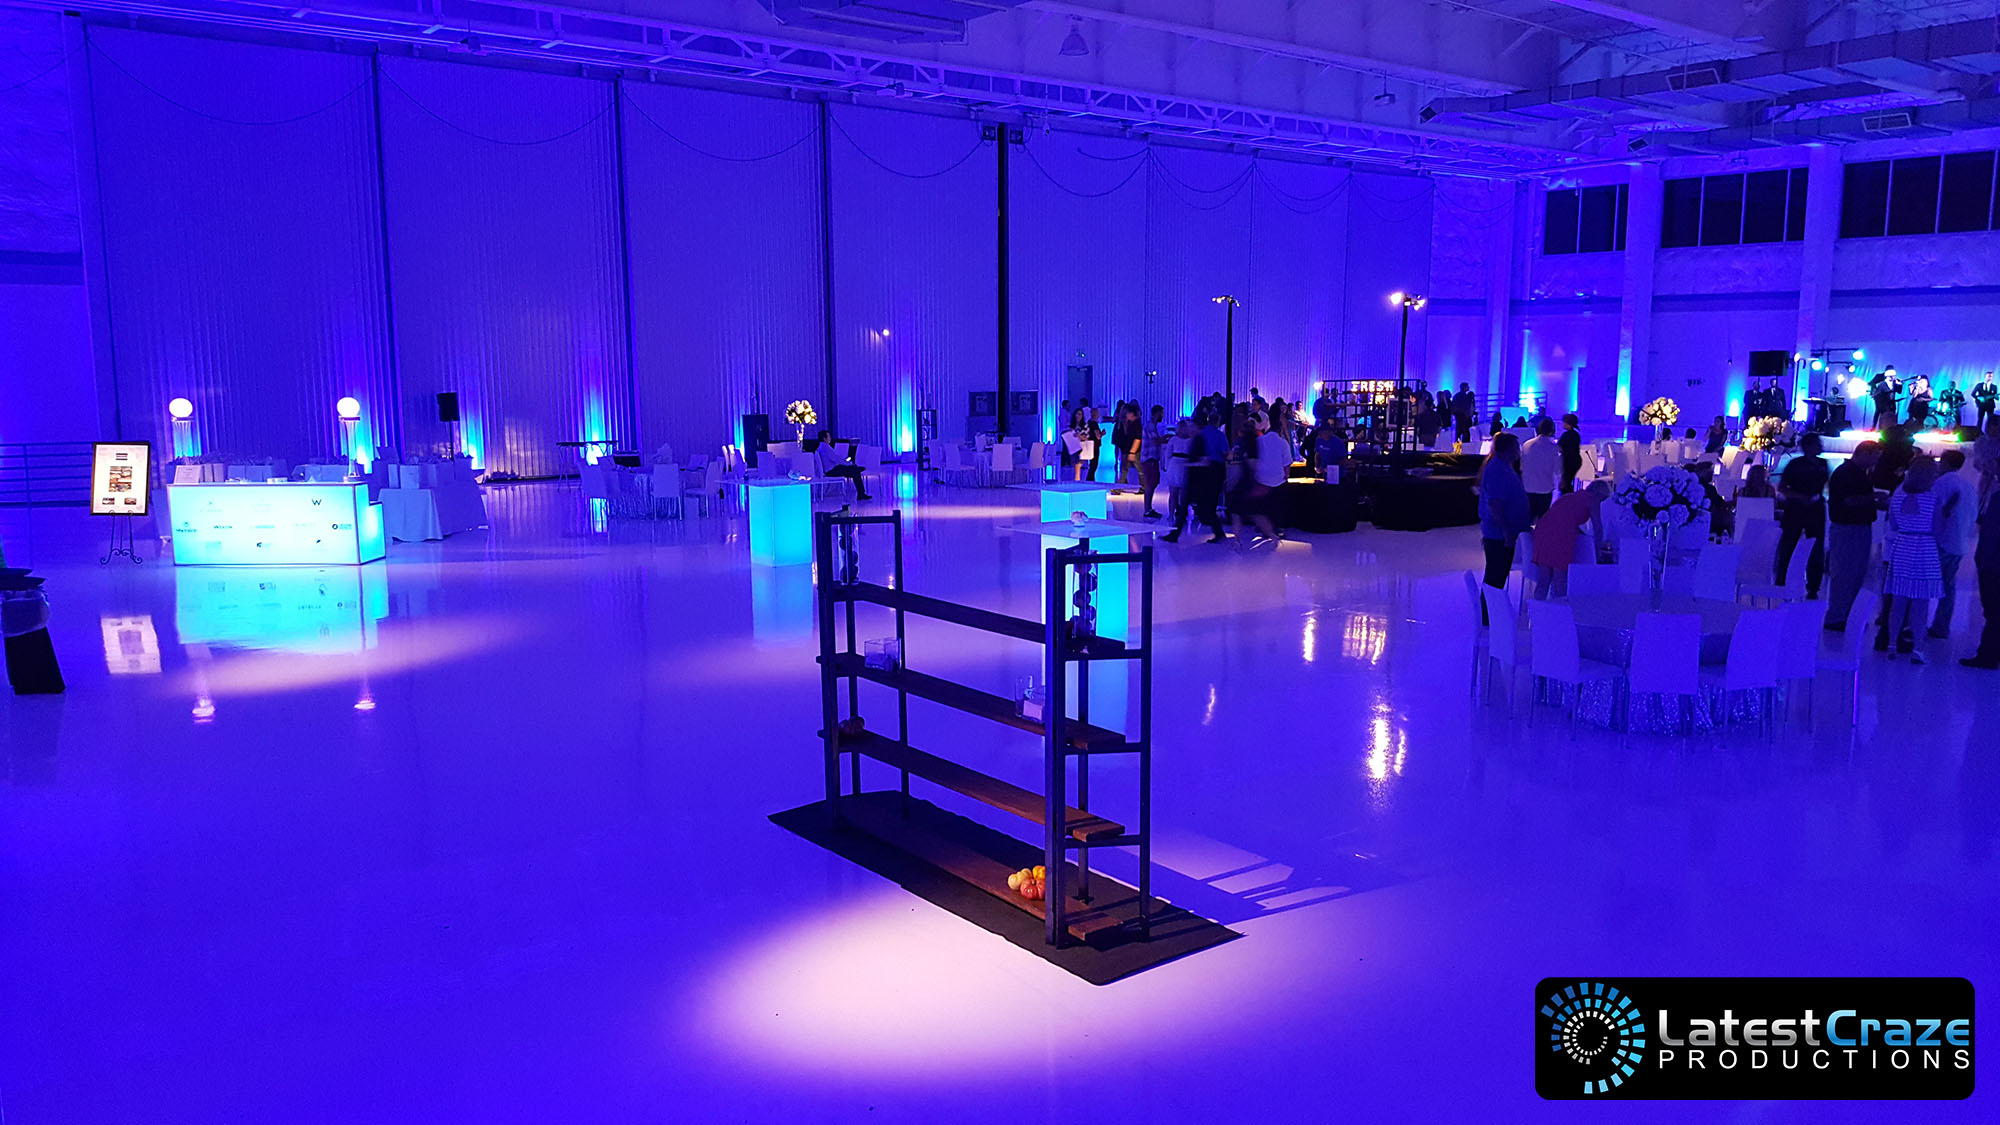 battery magnetic pinspots blue uplighting corporate event hangar one scottsdale latest craze productions 061816